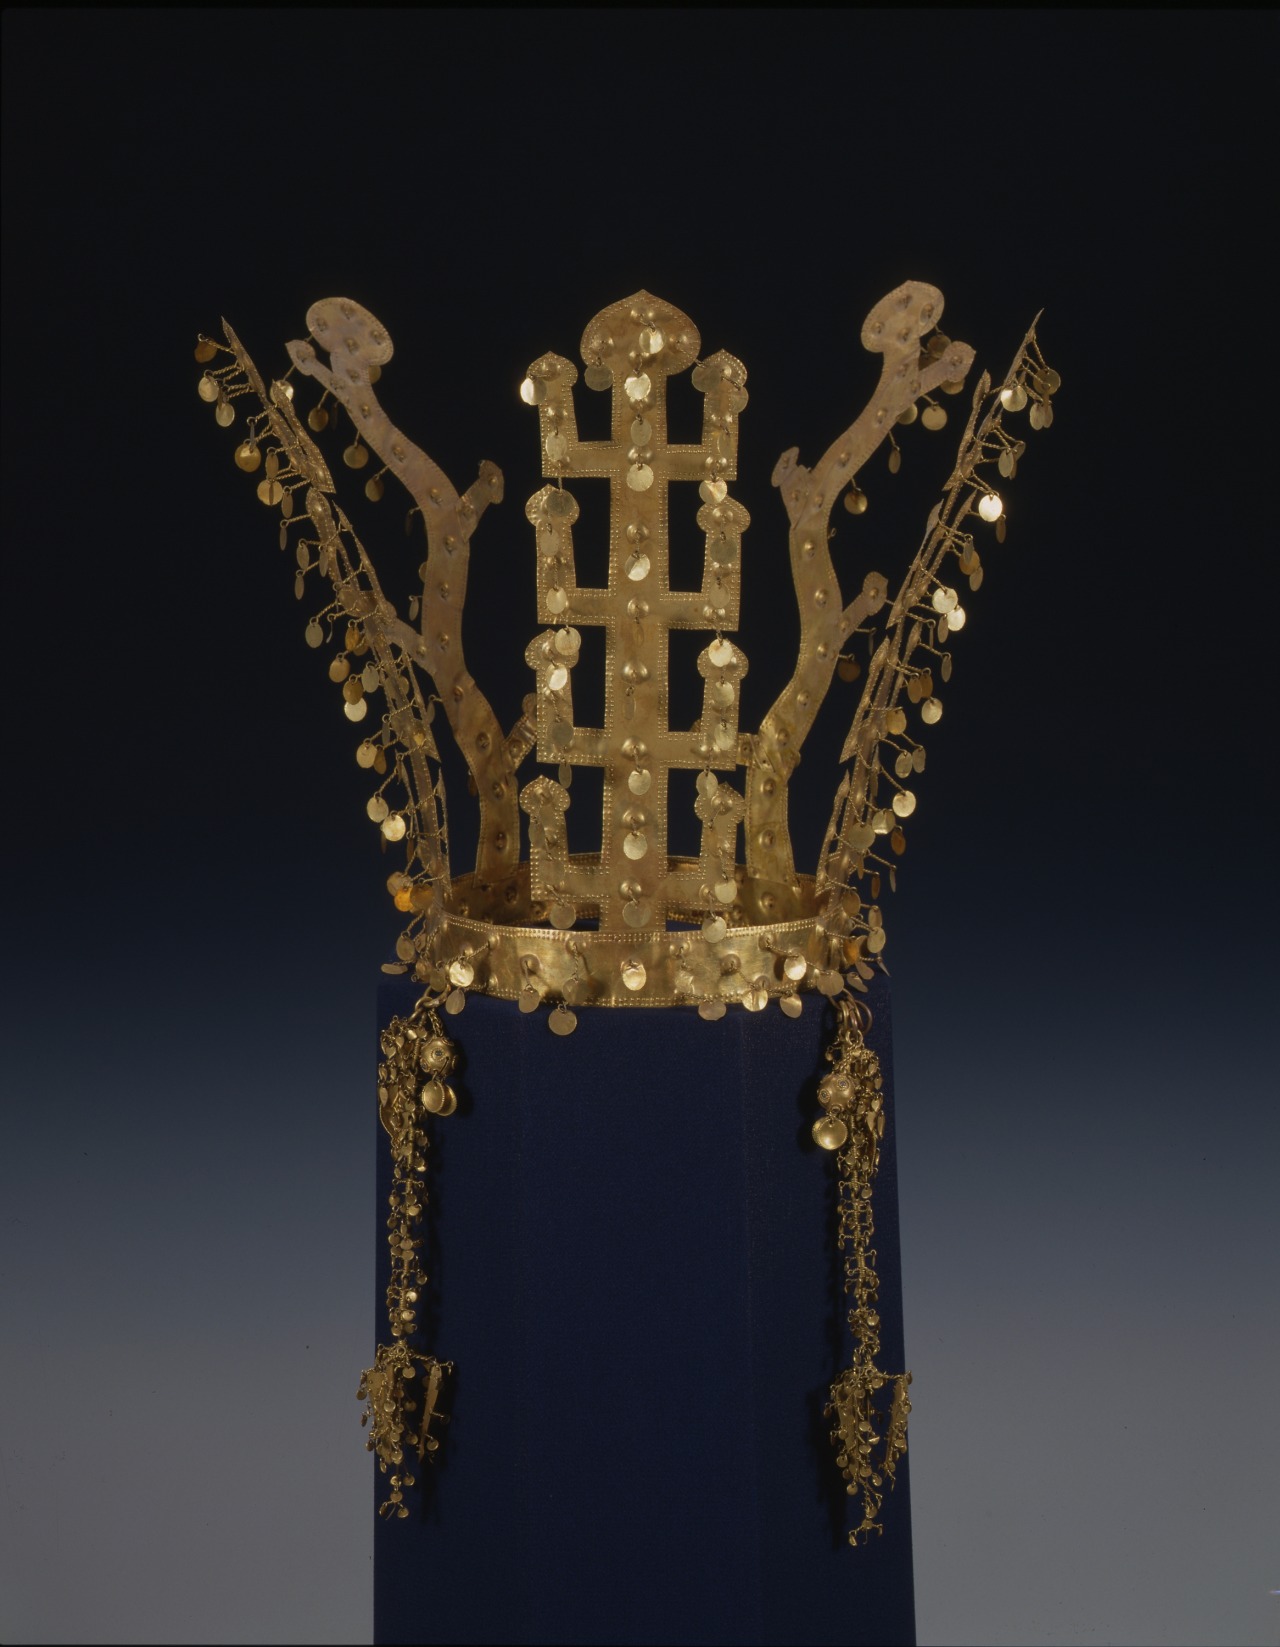 Korean gold crown from the Geumnyeongchong Tomb, Silla Kingdom 5th-7th century. The National Museum of Korea.jpg